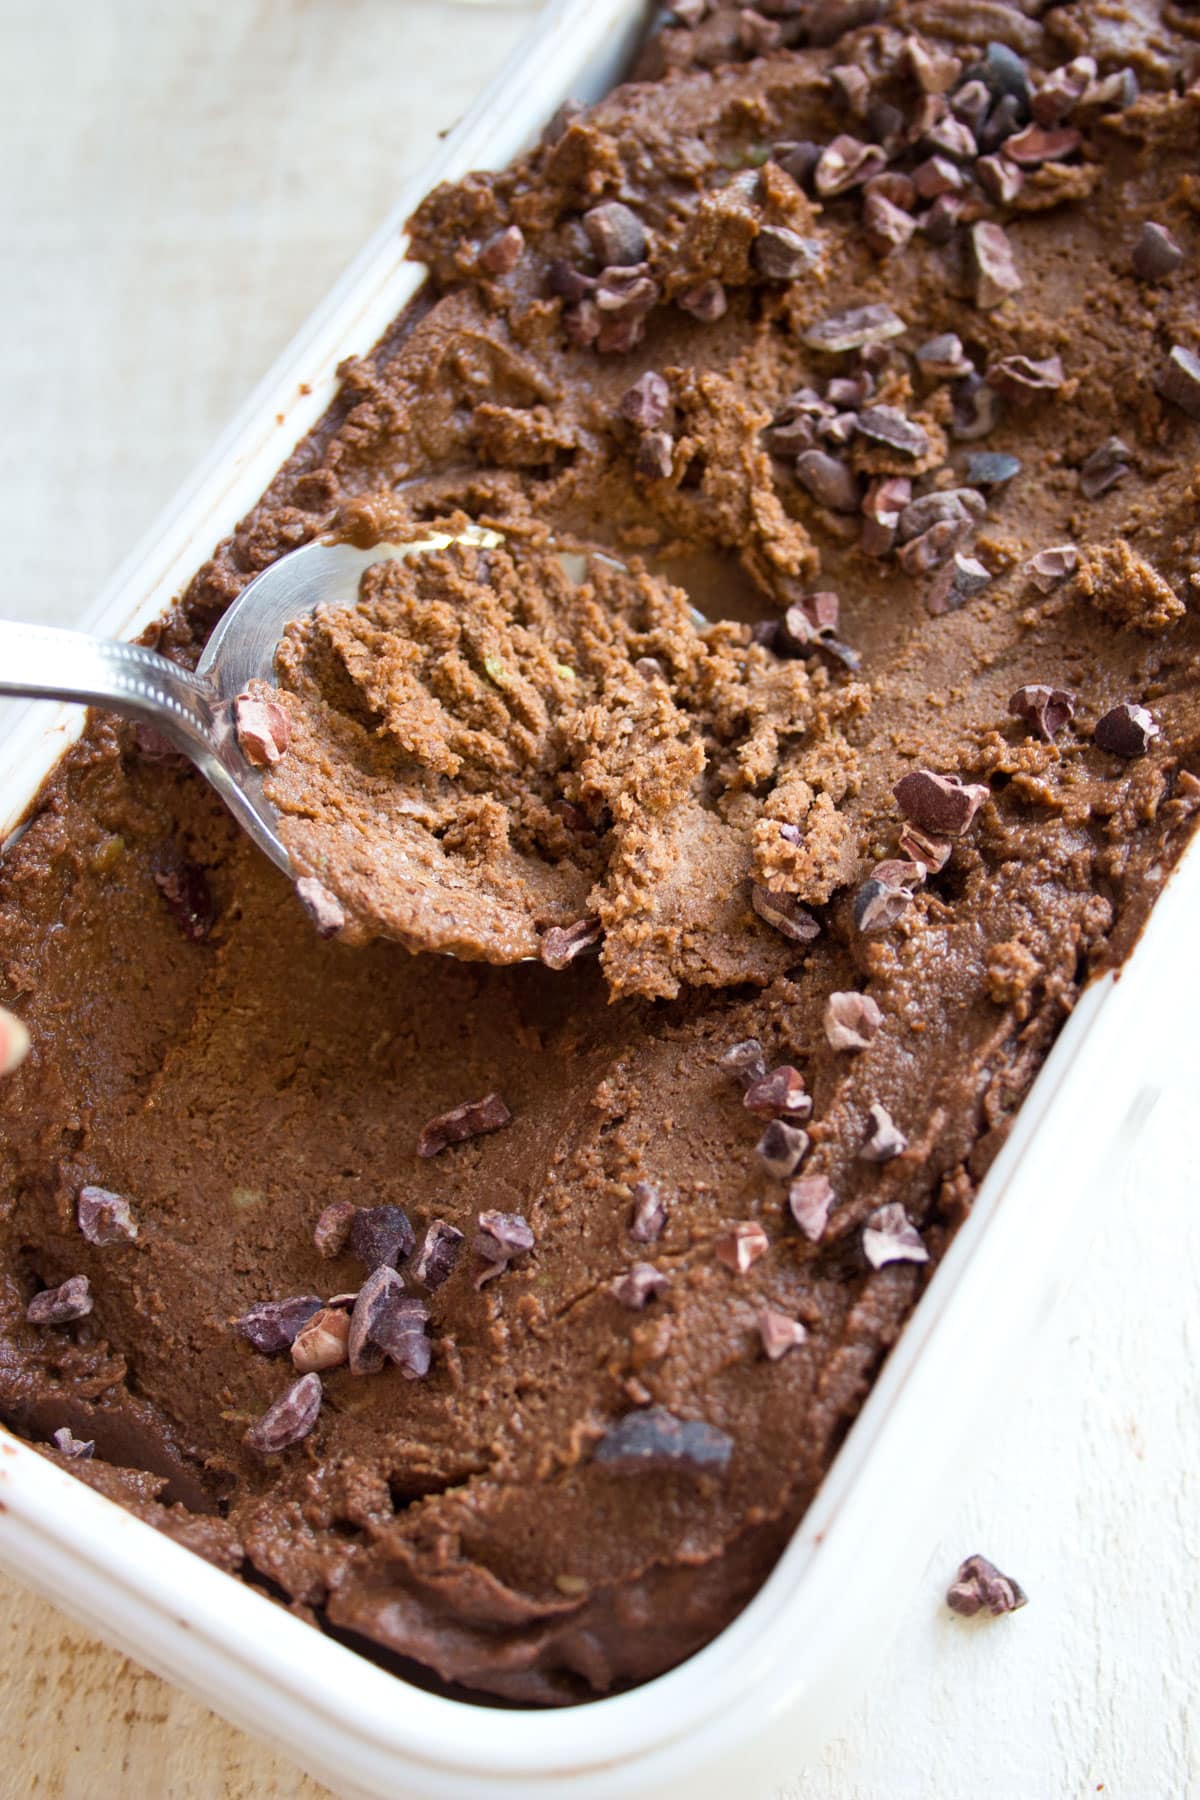 A spoon and a box of chocolate avocado ice cream.